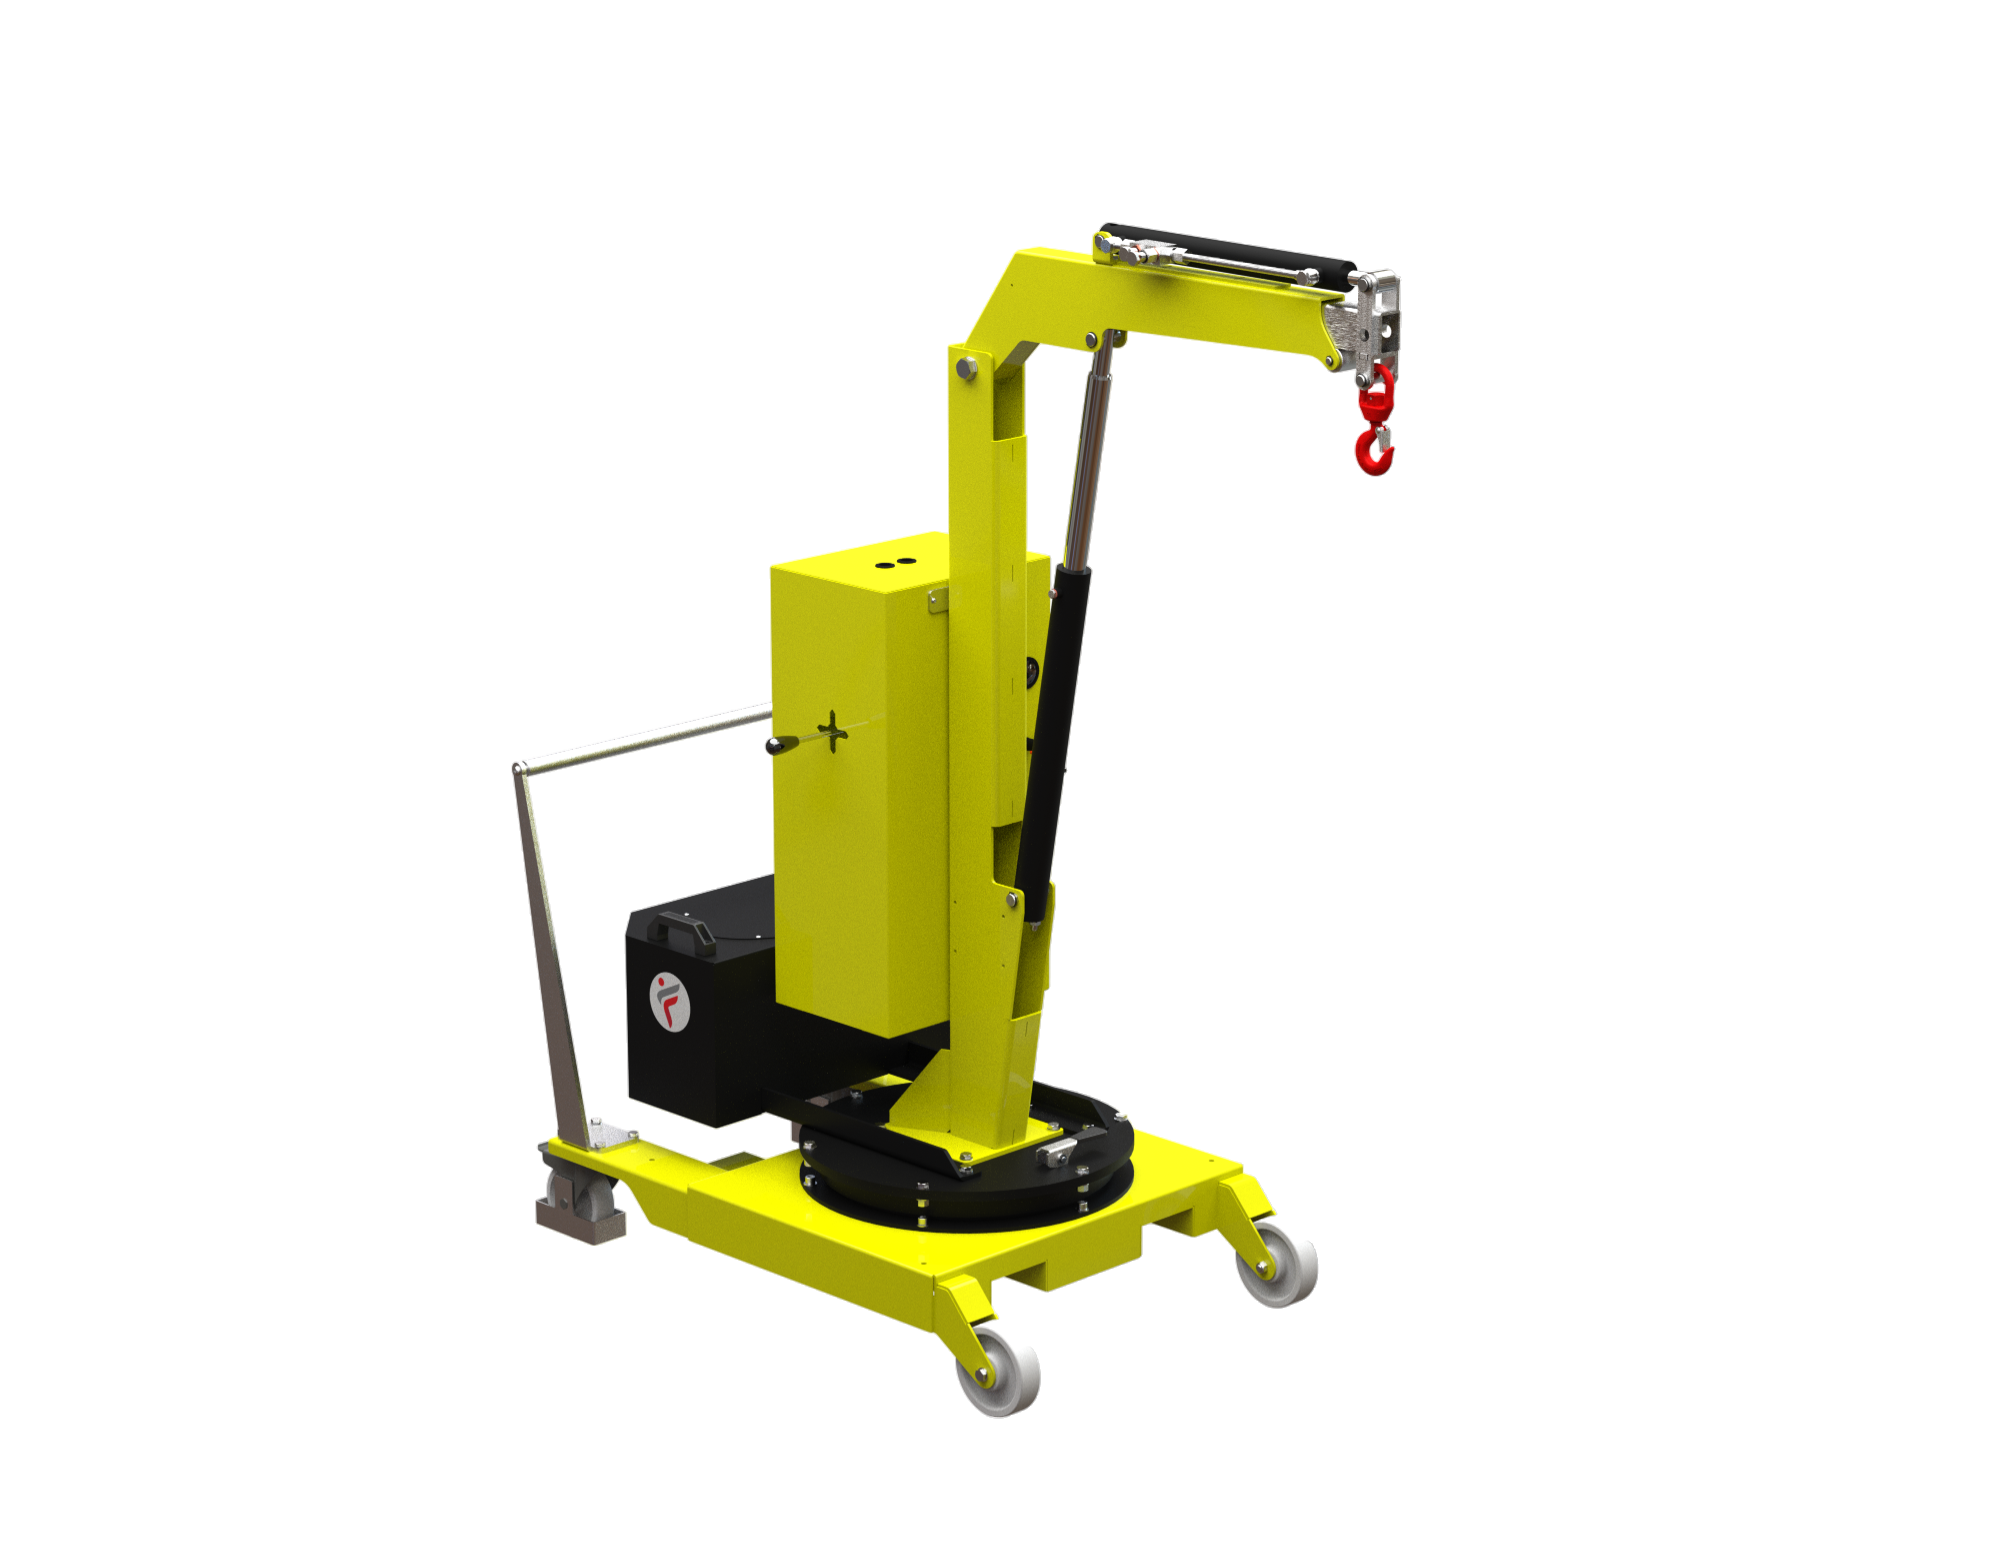 01B2SE_400 counterbalanced mini crane with electric arm to lift loads of 200 kg